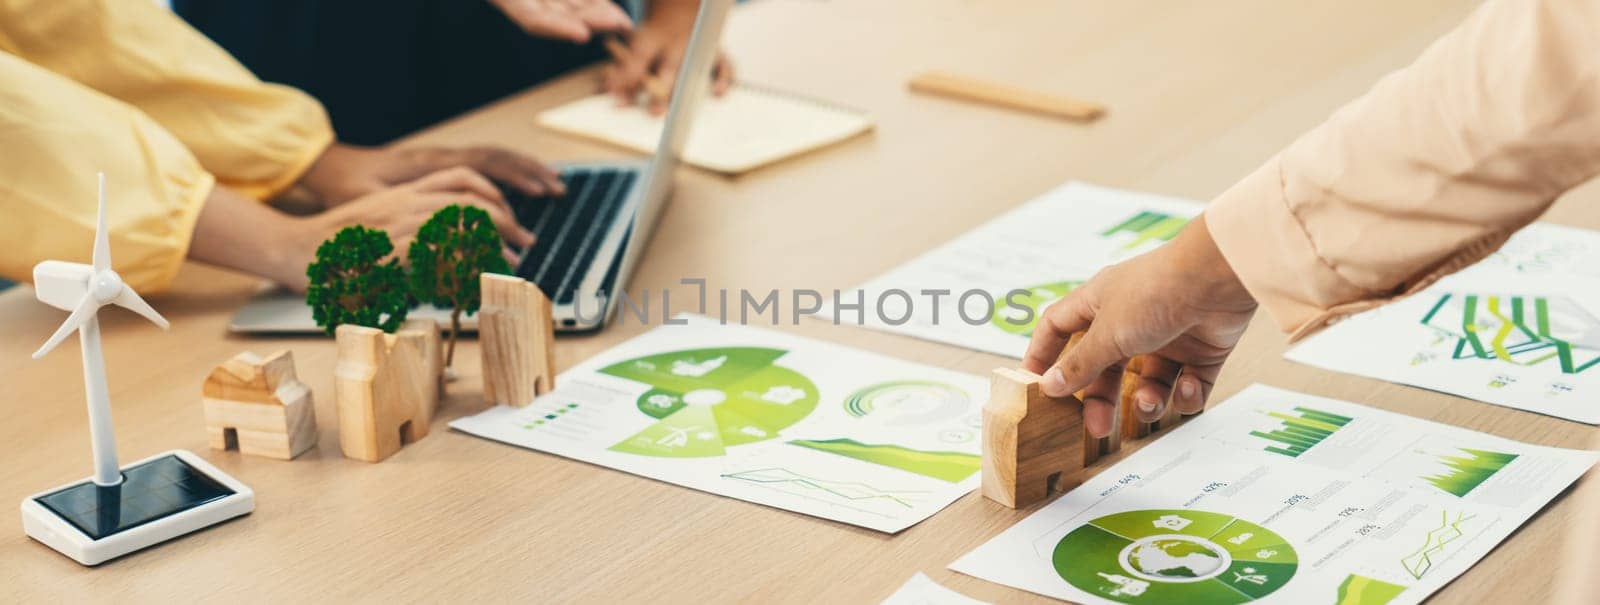 Environmental documents and a windmill model representing the use of clean energy are scattered on the table during a green business discussion about investing in clean energy. Closeup. Delineation.